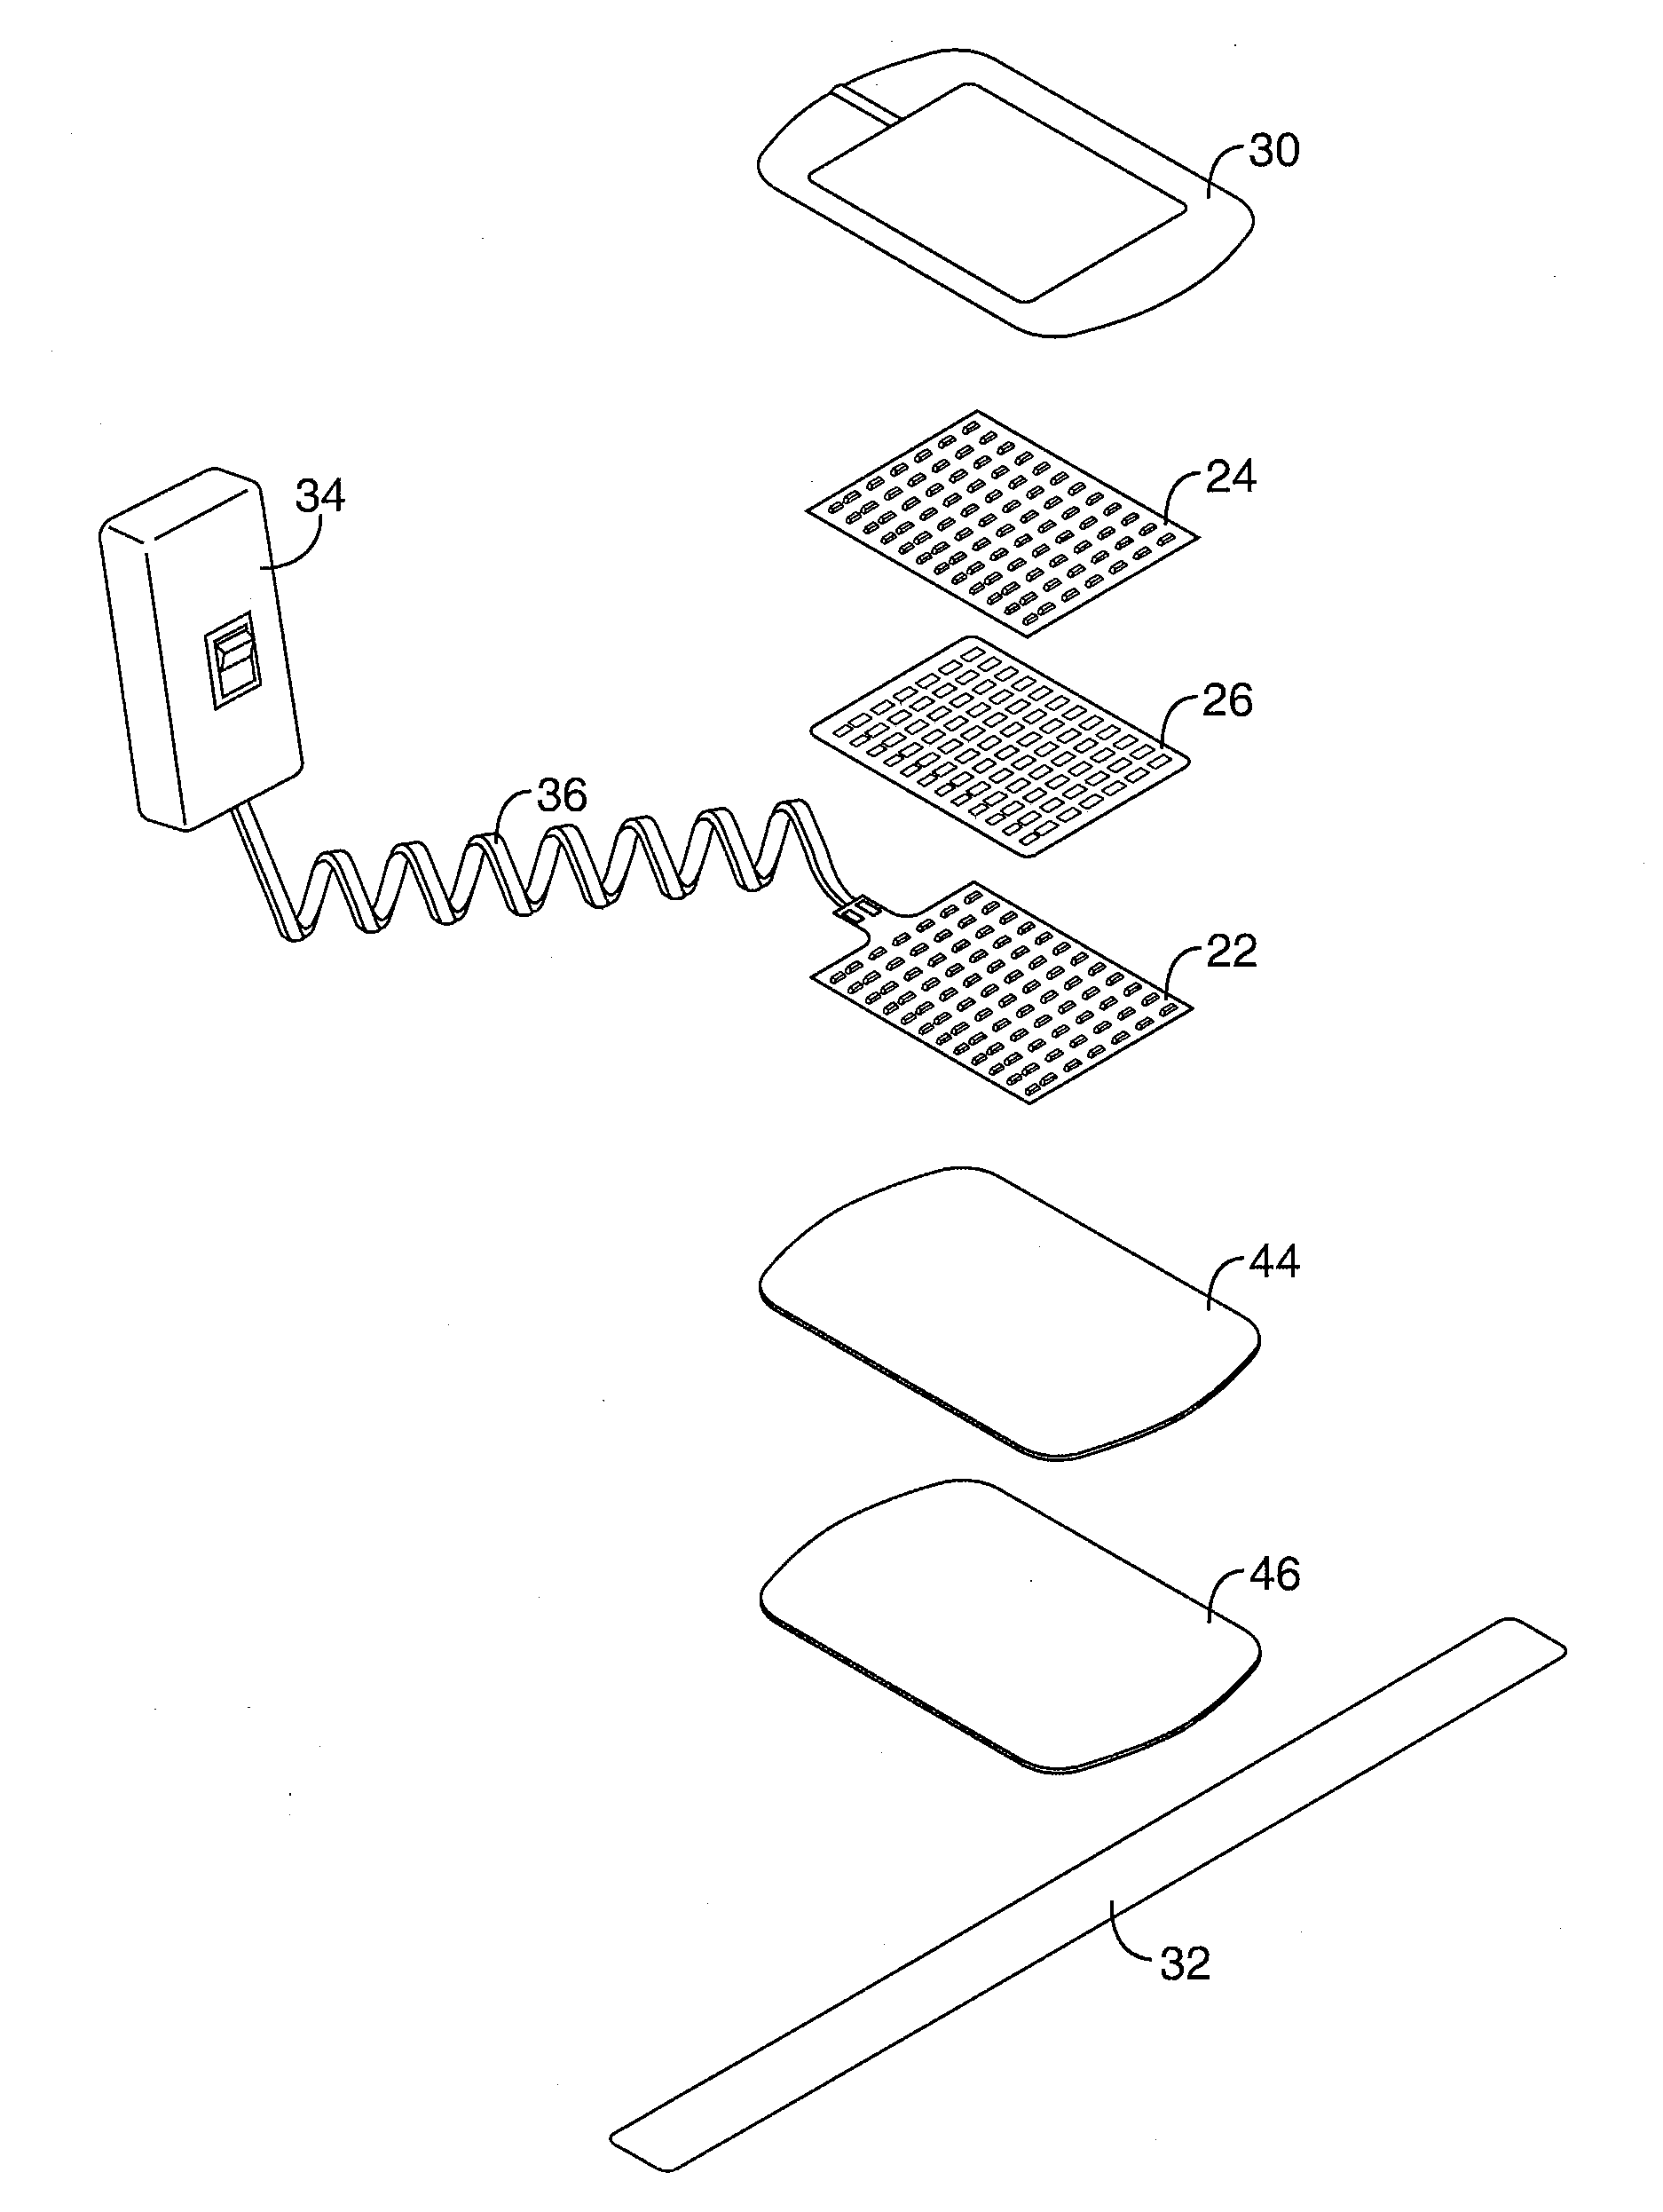 Method and Apparatus for Bi-Axial Light Treatment